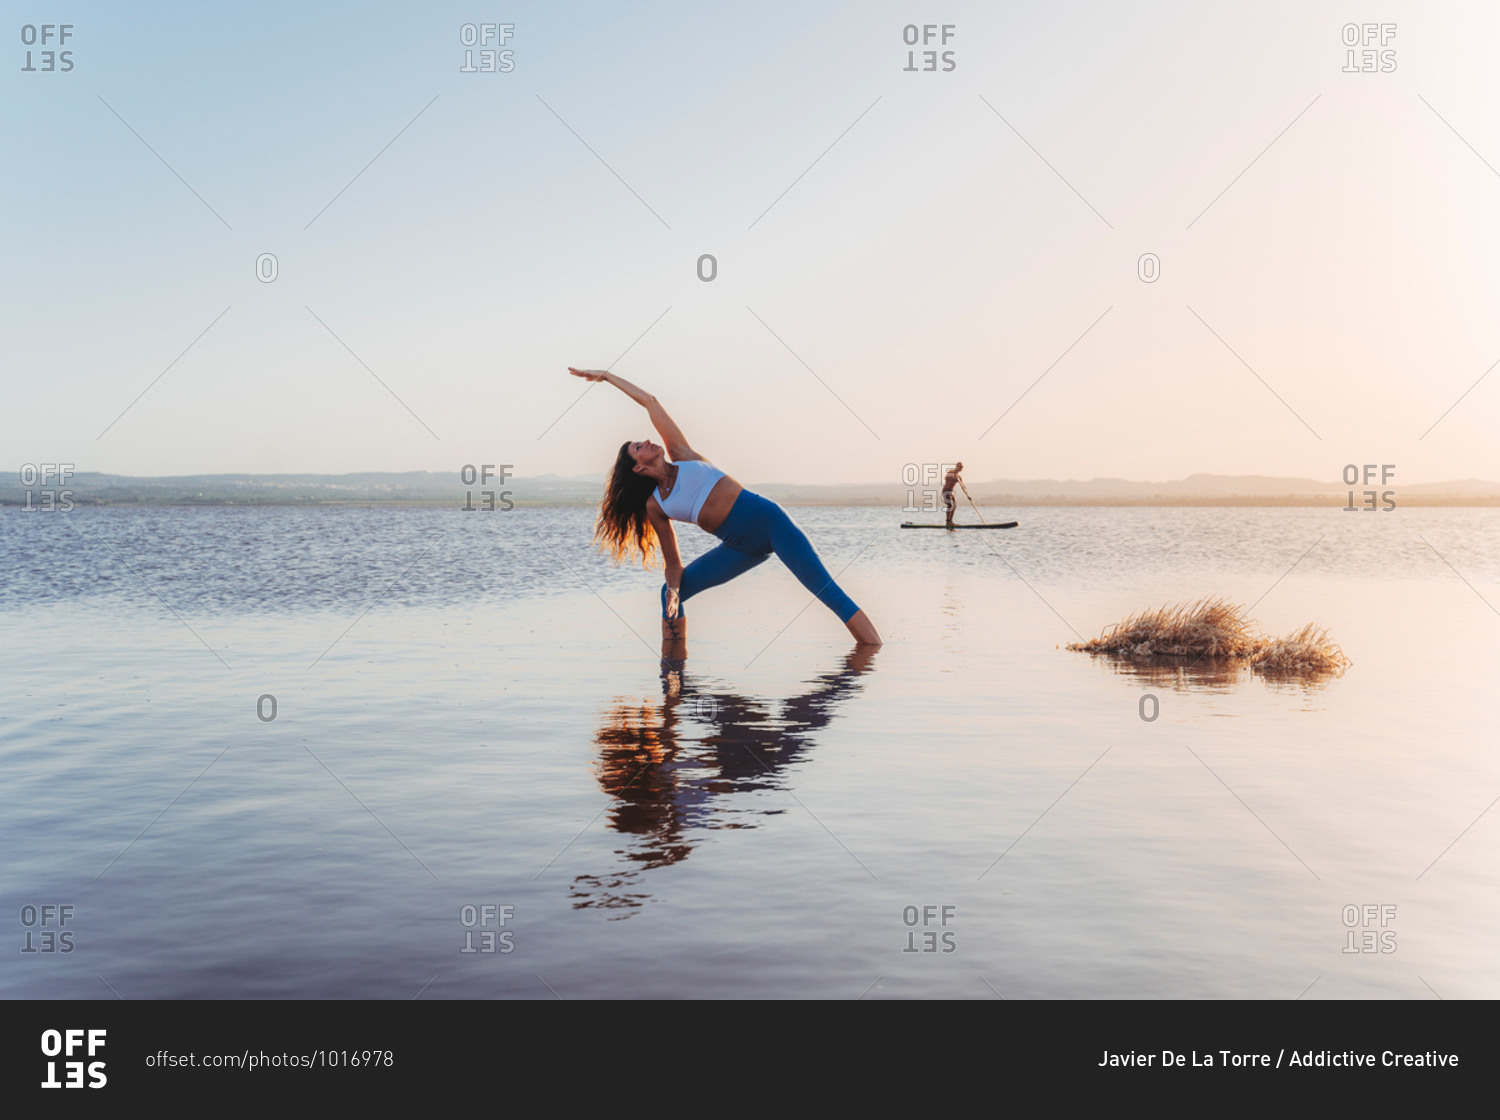 Full body of unrecognizable slim female in sportswear stretching in Extended Side Angle yoga asana during practice on lake shore against cloudless sunset sky with distant man surfing on paddle board in background